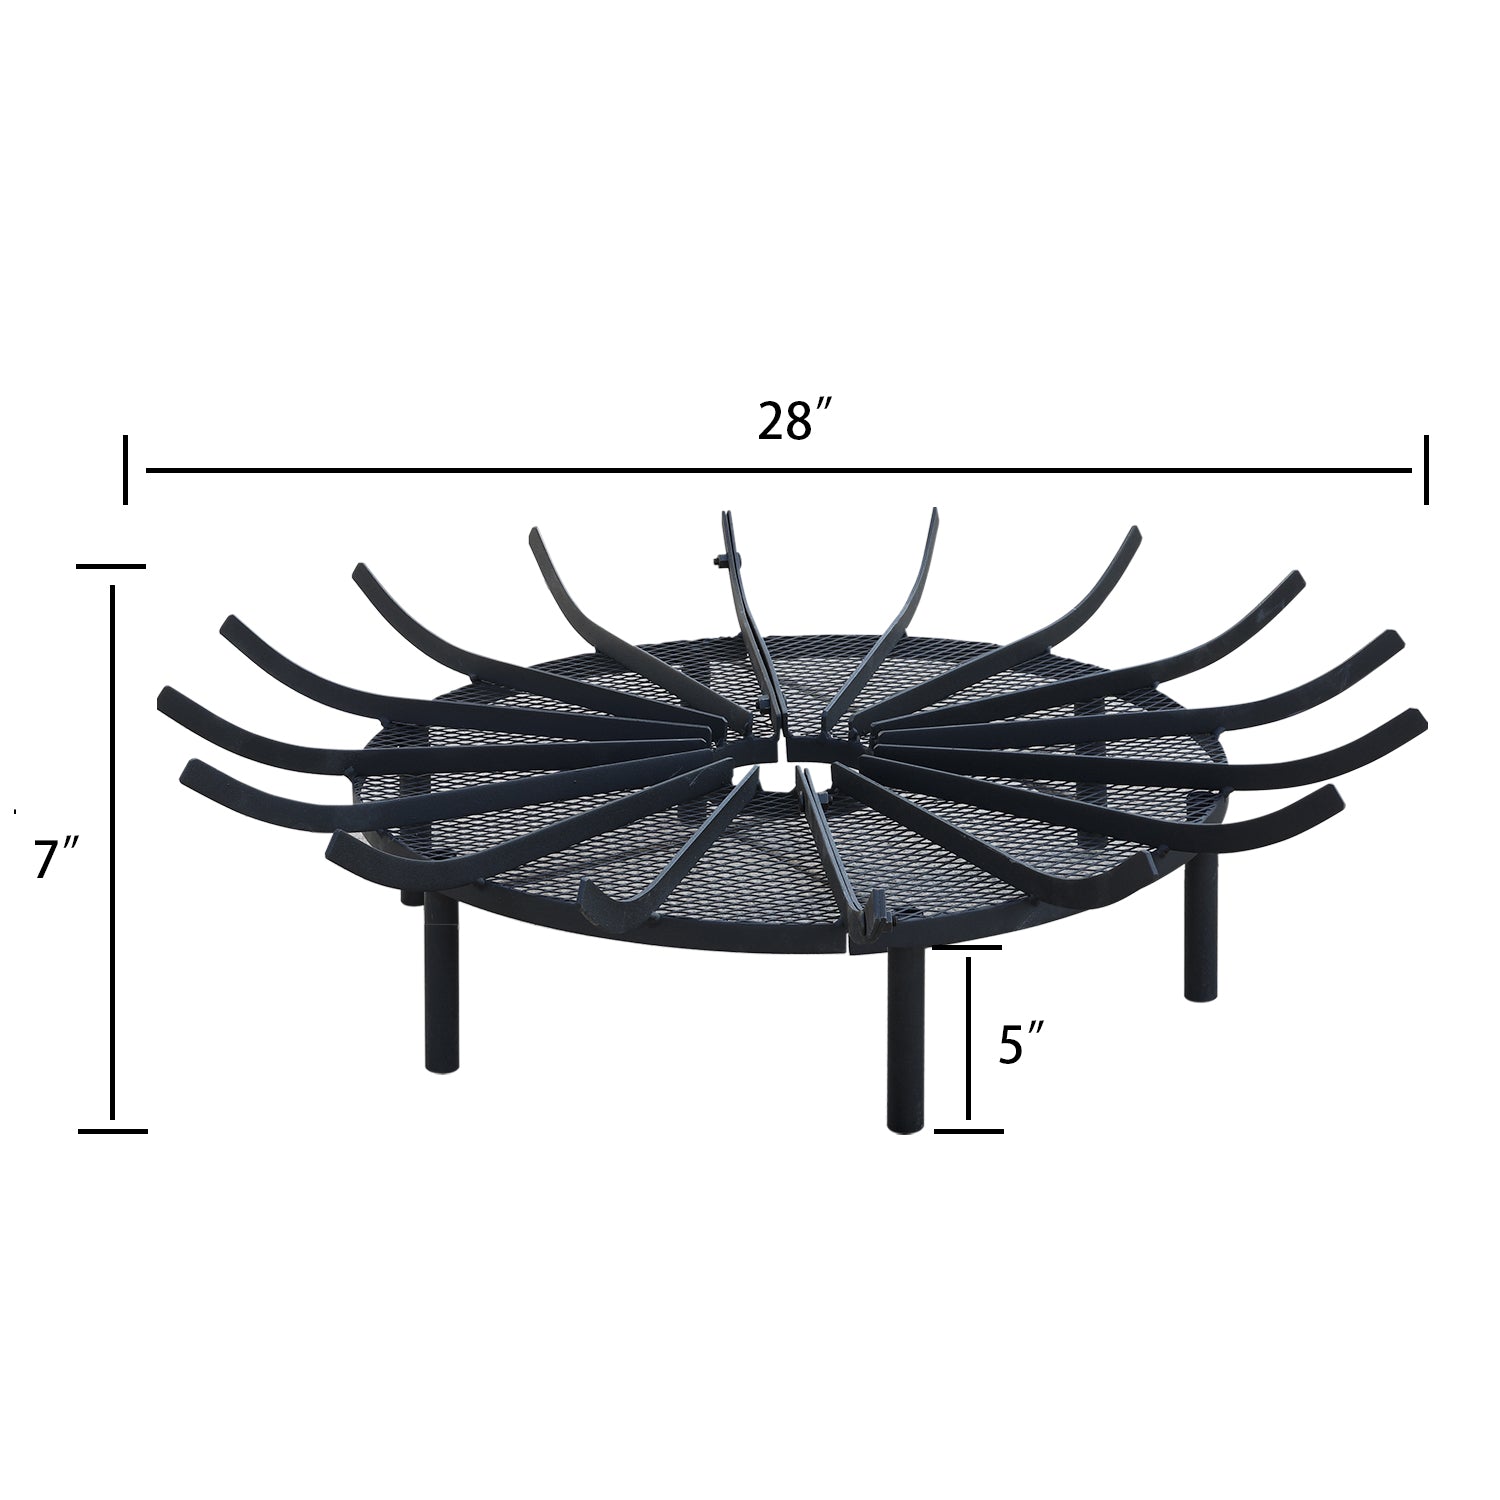 https://aoodorshop.com/cdn/shop/products/aoodor-283236-fire-grate-log-grate-round-spider-wagon-wheel-firewood-grates-heavy-duty-fire-pit-grate-for-outdoor-campfire-hearth-wood-stove-and-outdoor-camping-590714.jpg?v=1703660540